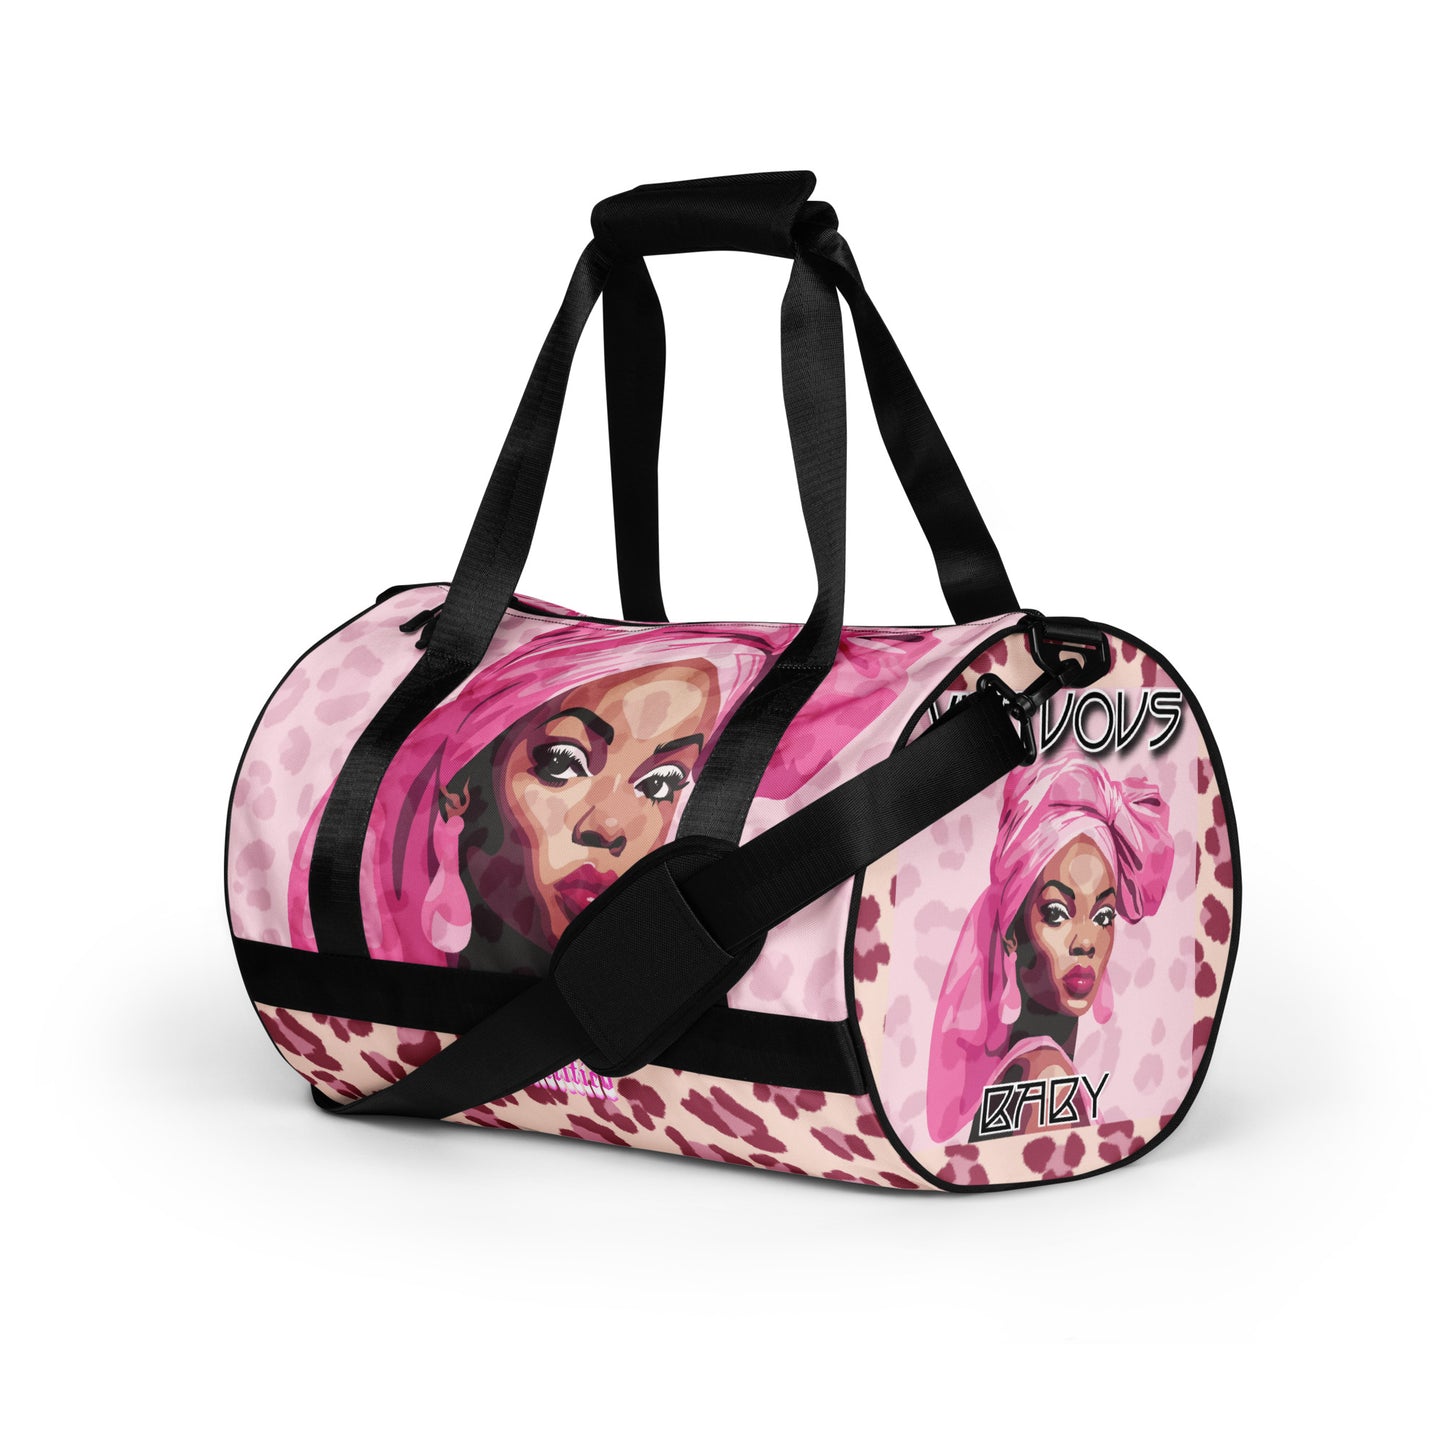 Virtuous Forever- All-over print gym bag